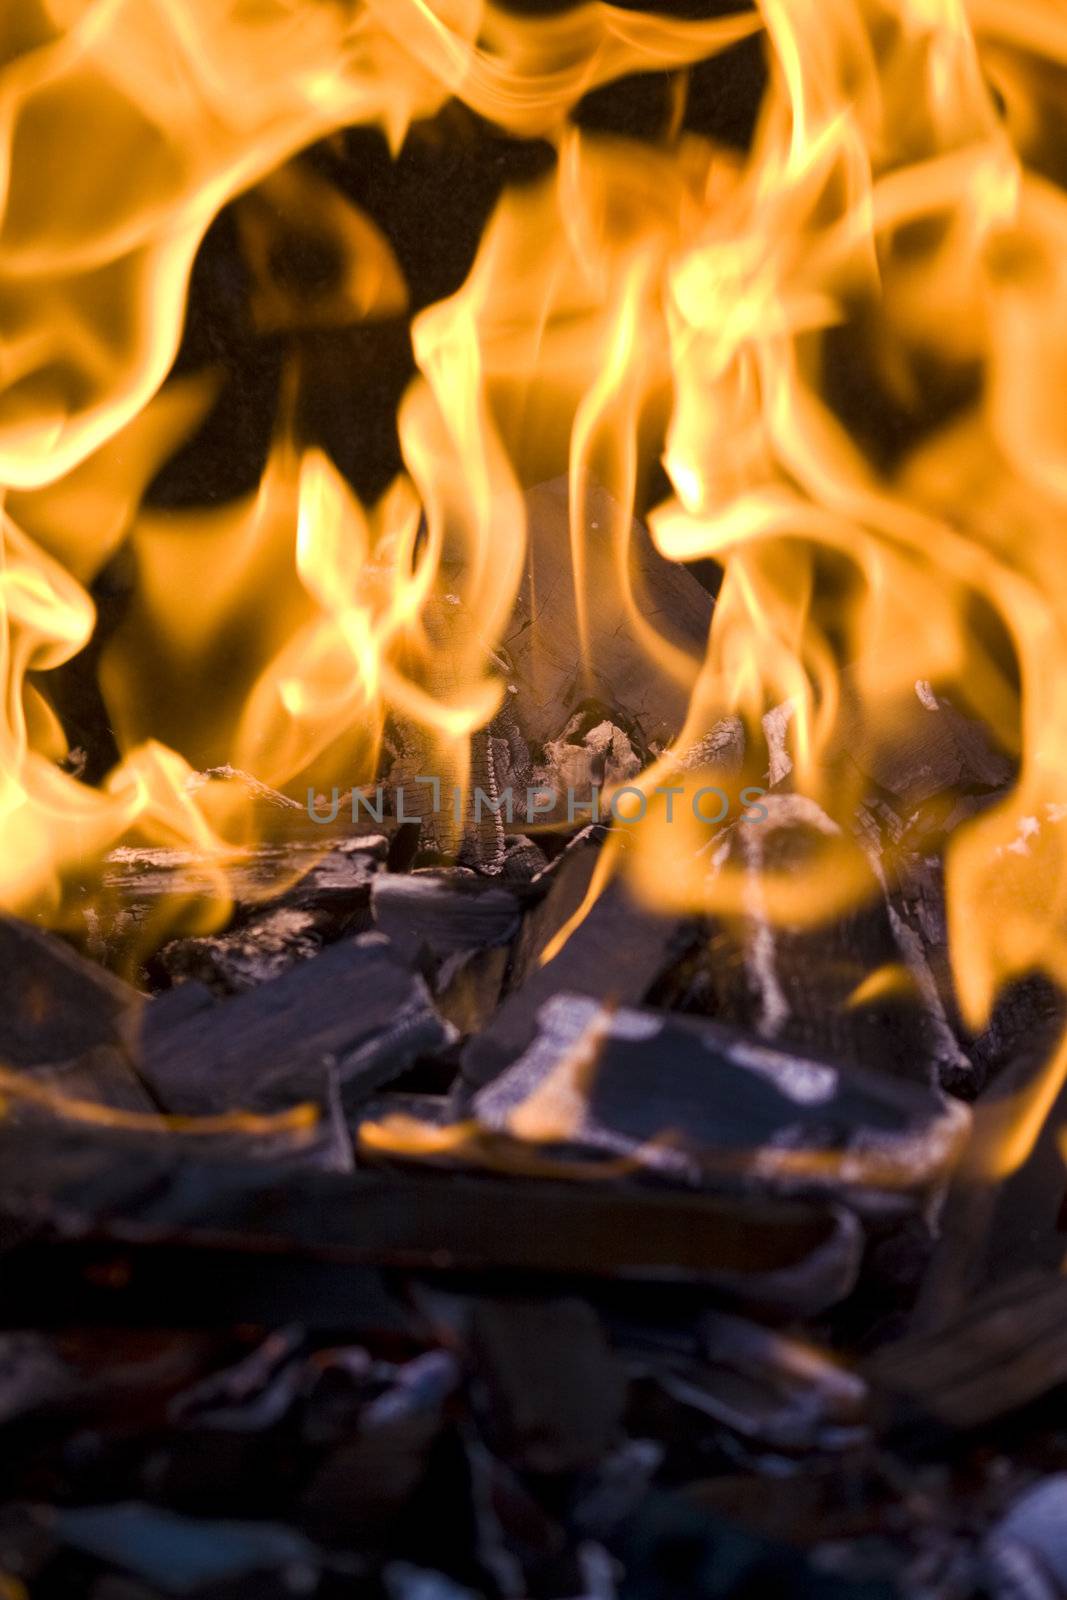 Fire in charcoal briquette barbeque grill.